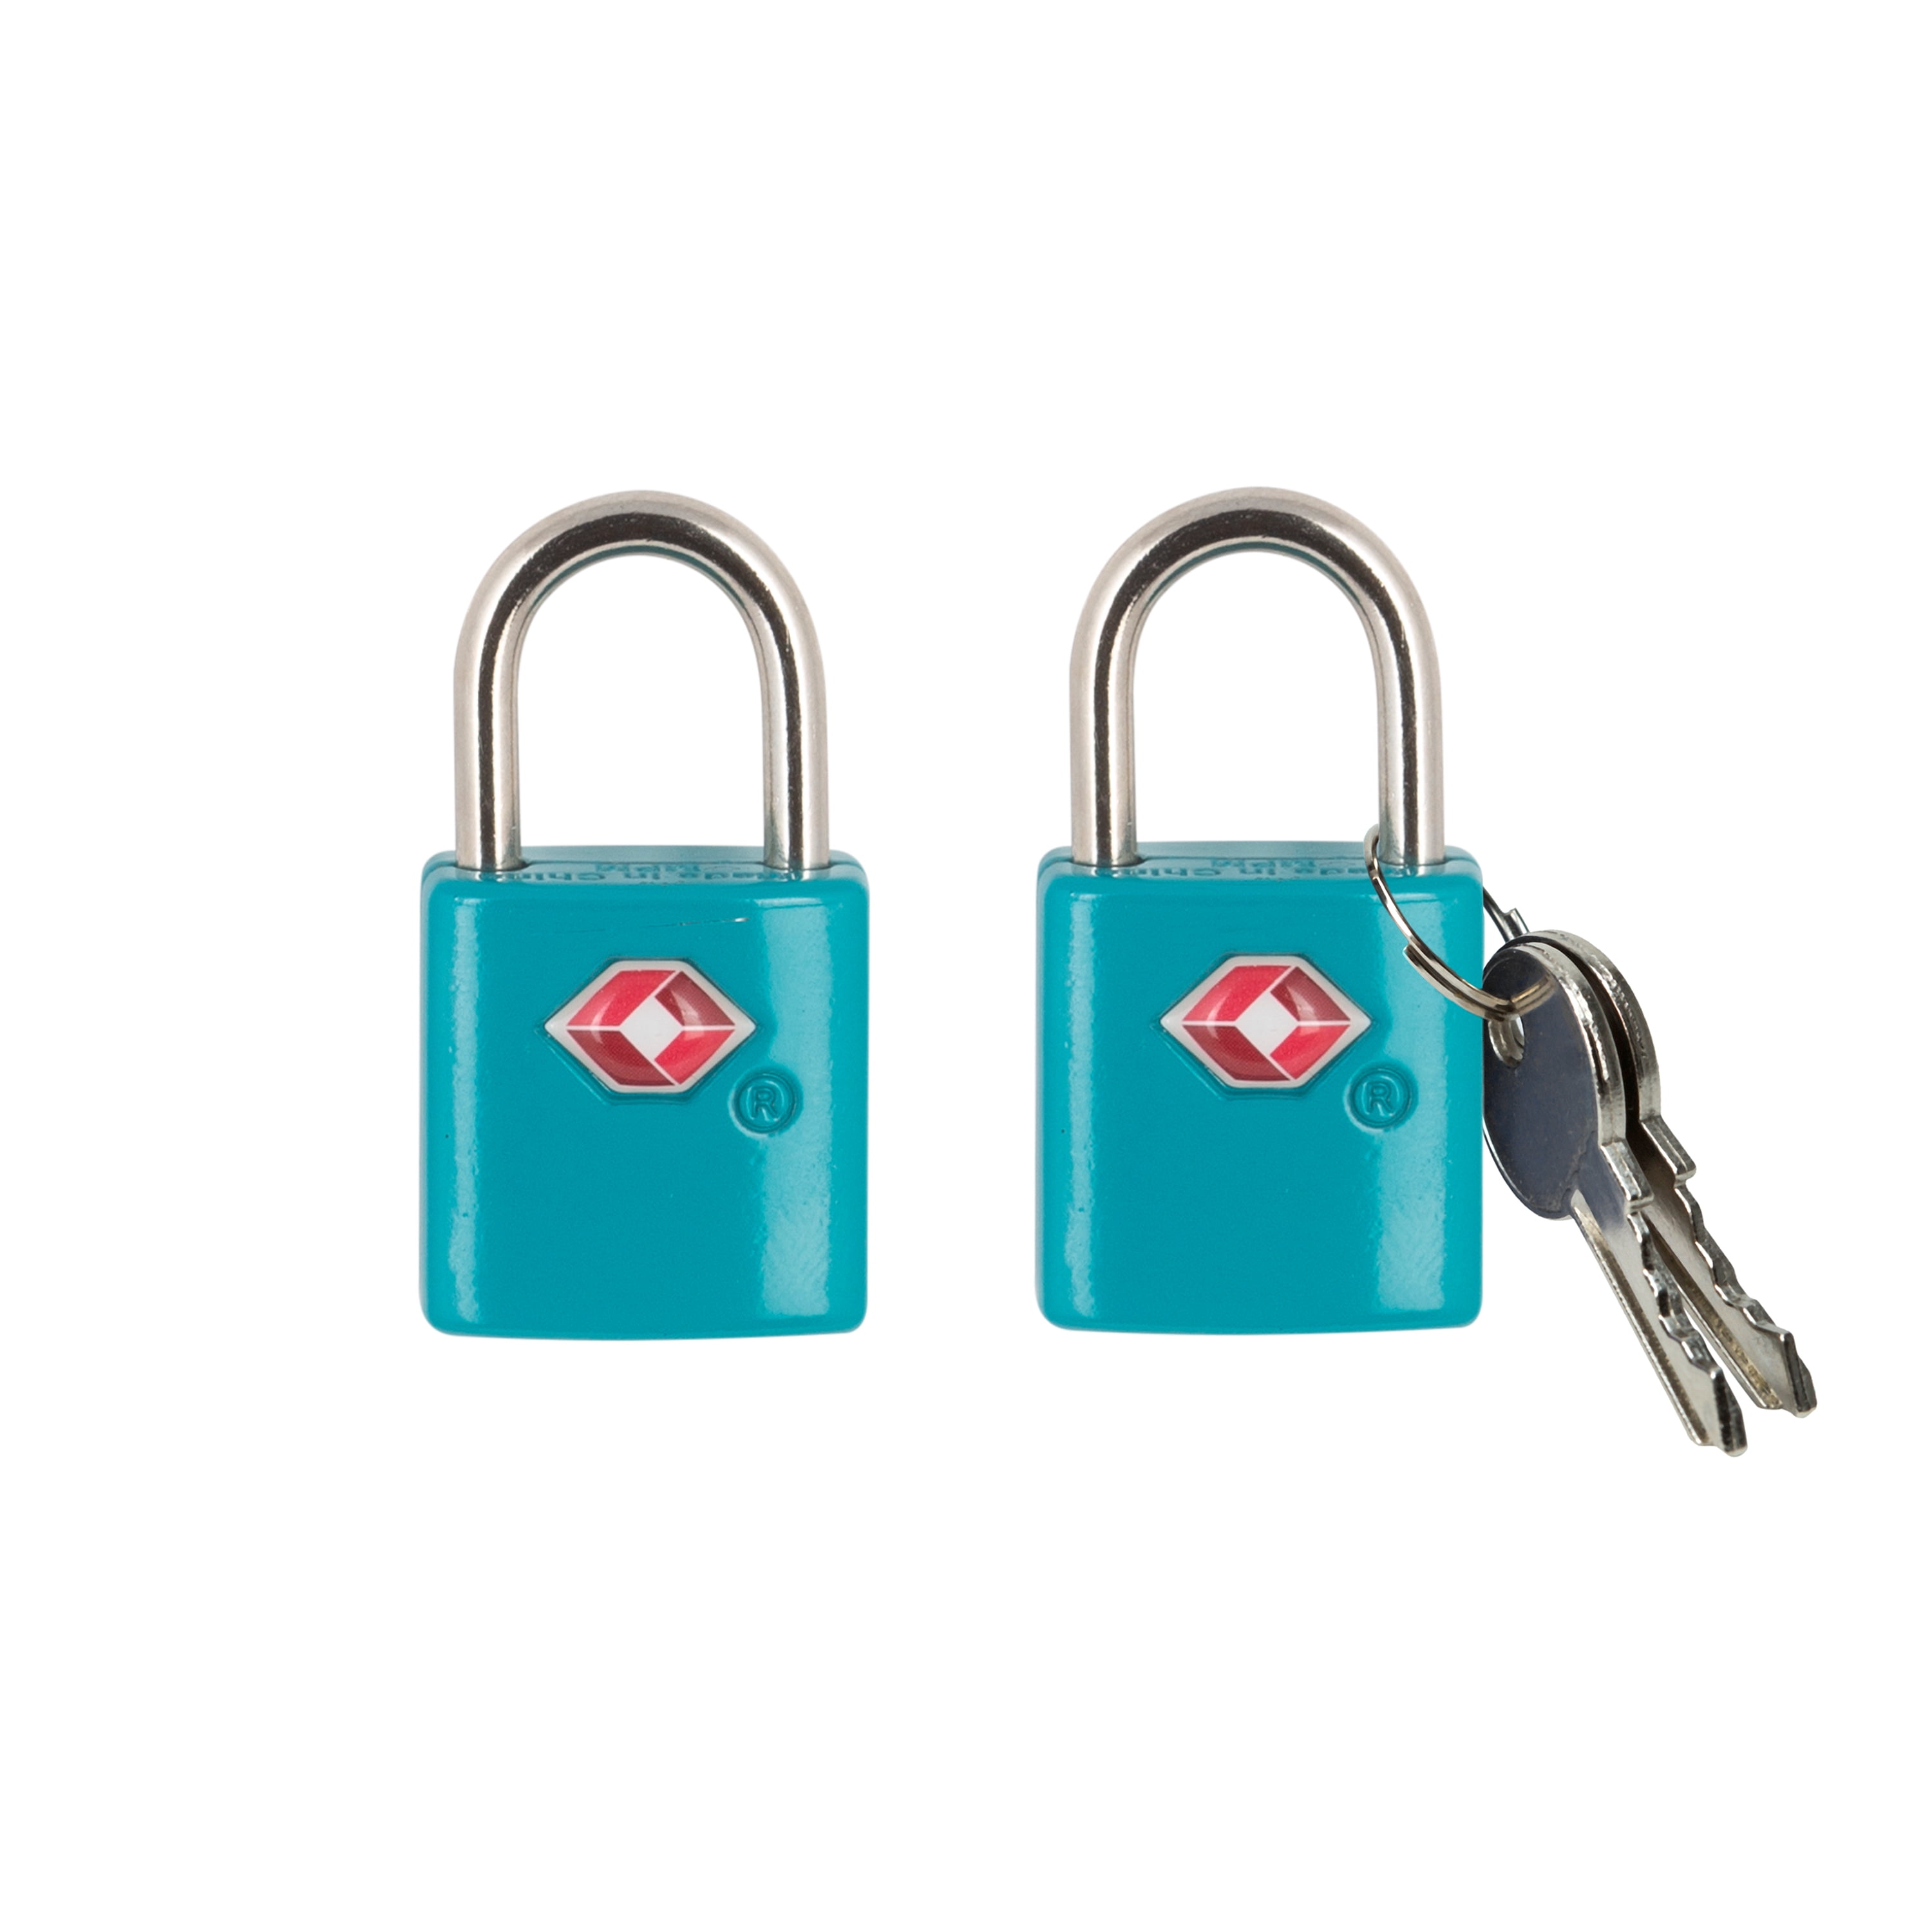 Protege 2 Pack Travel Suitcase Luggage Locks with Keys, Blue Atoll